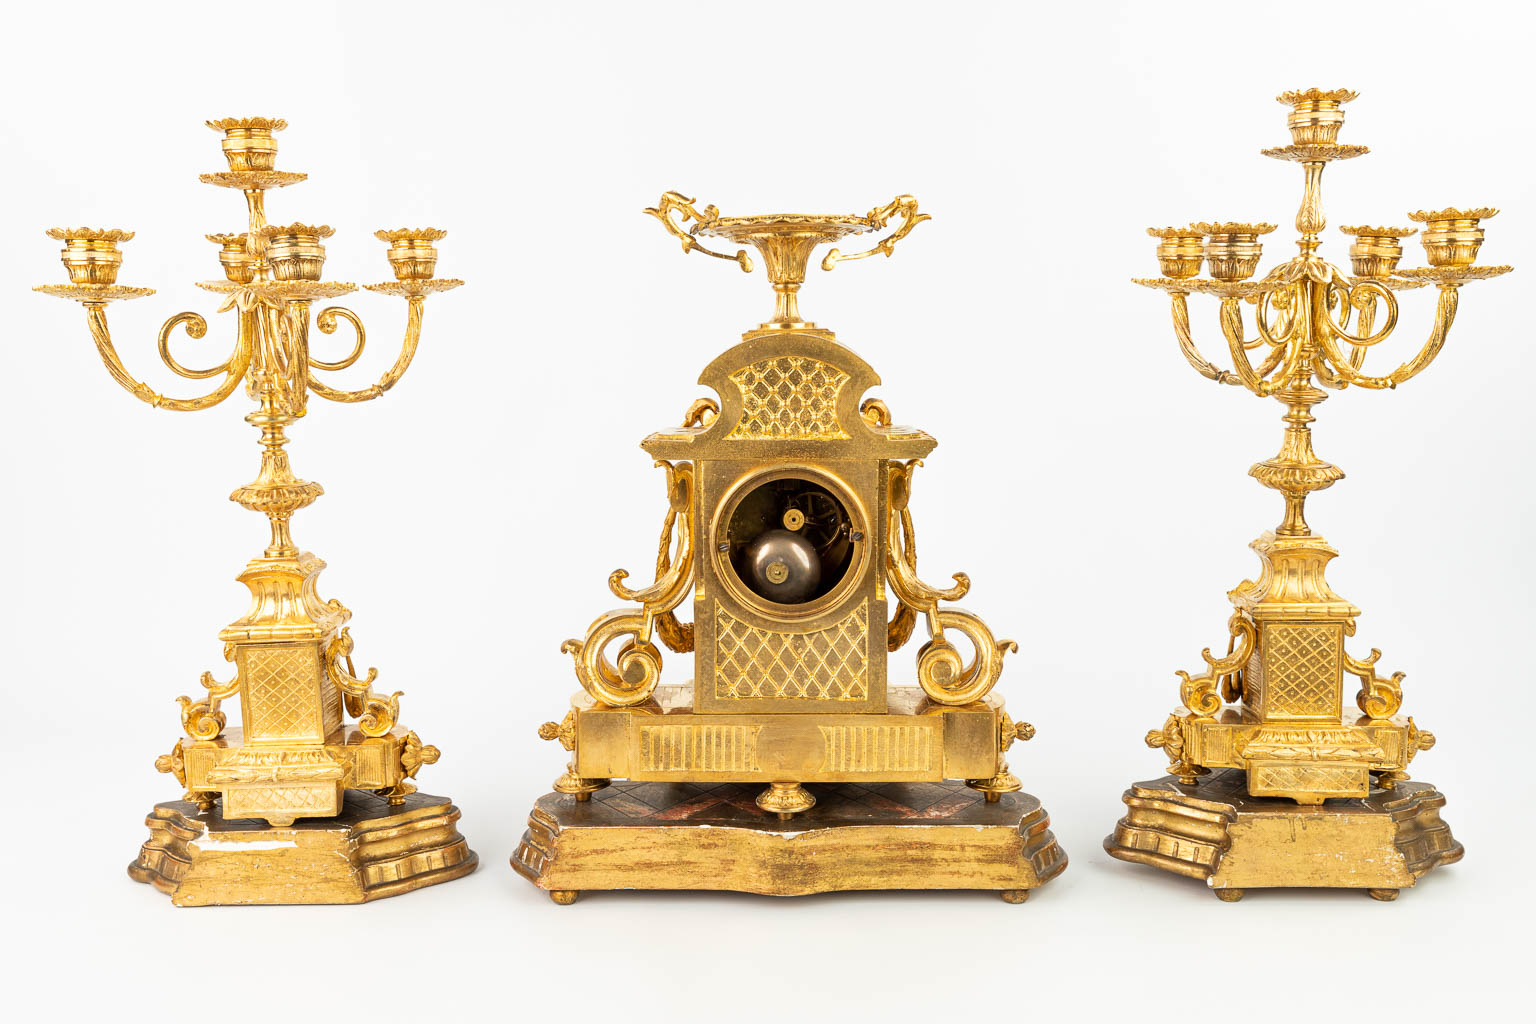 A three-piece garniture clock, inlaid with red marble and standing on wood bases. (H:38cm)